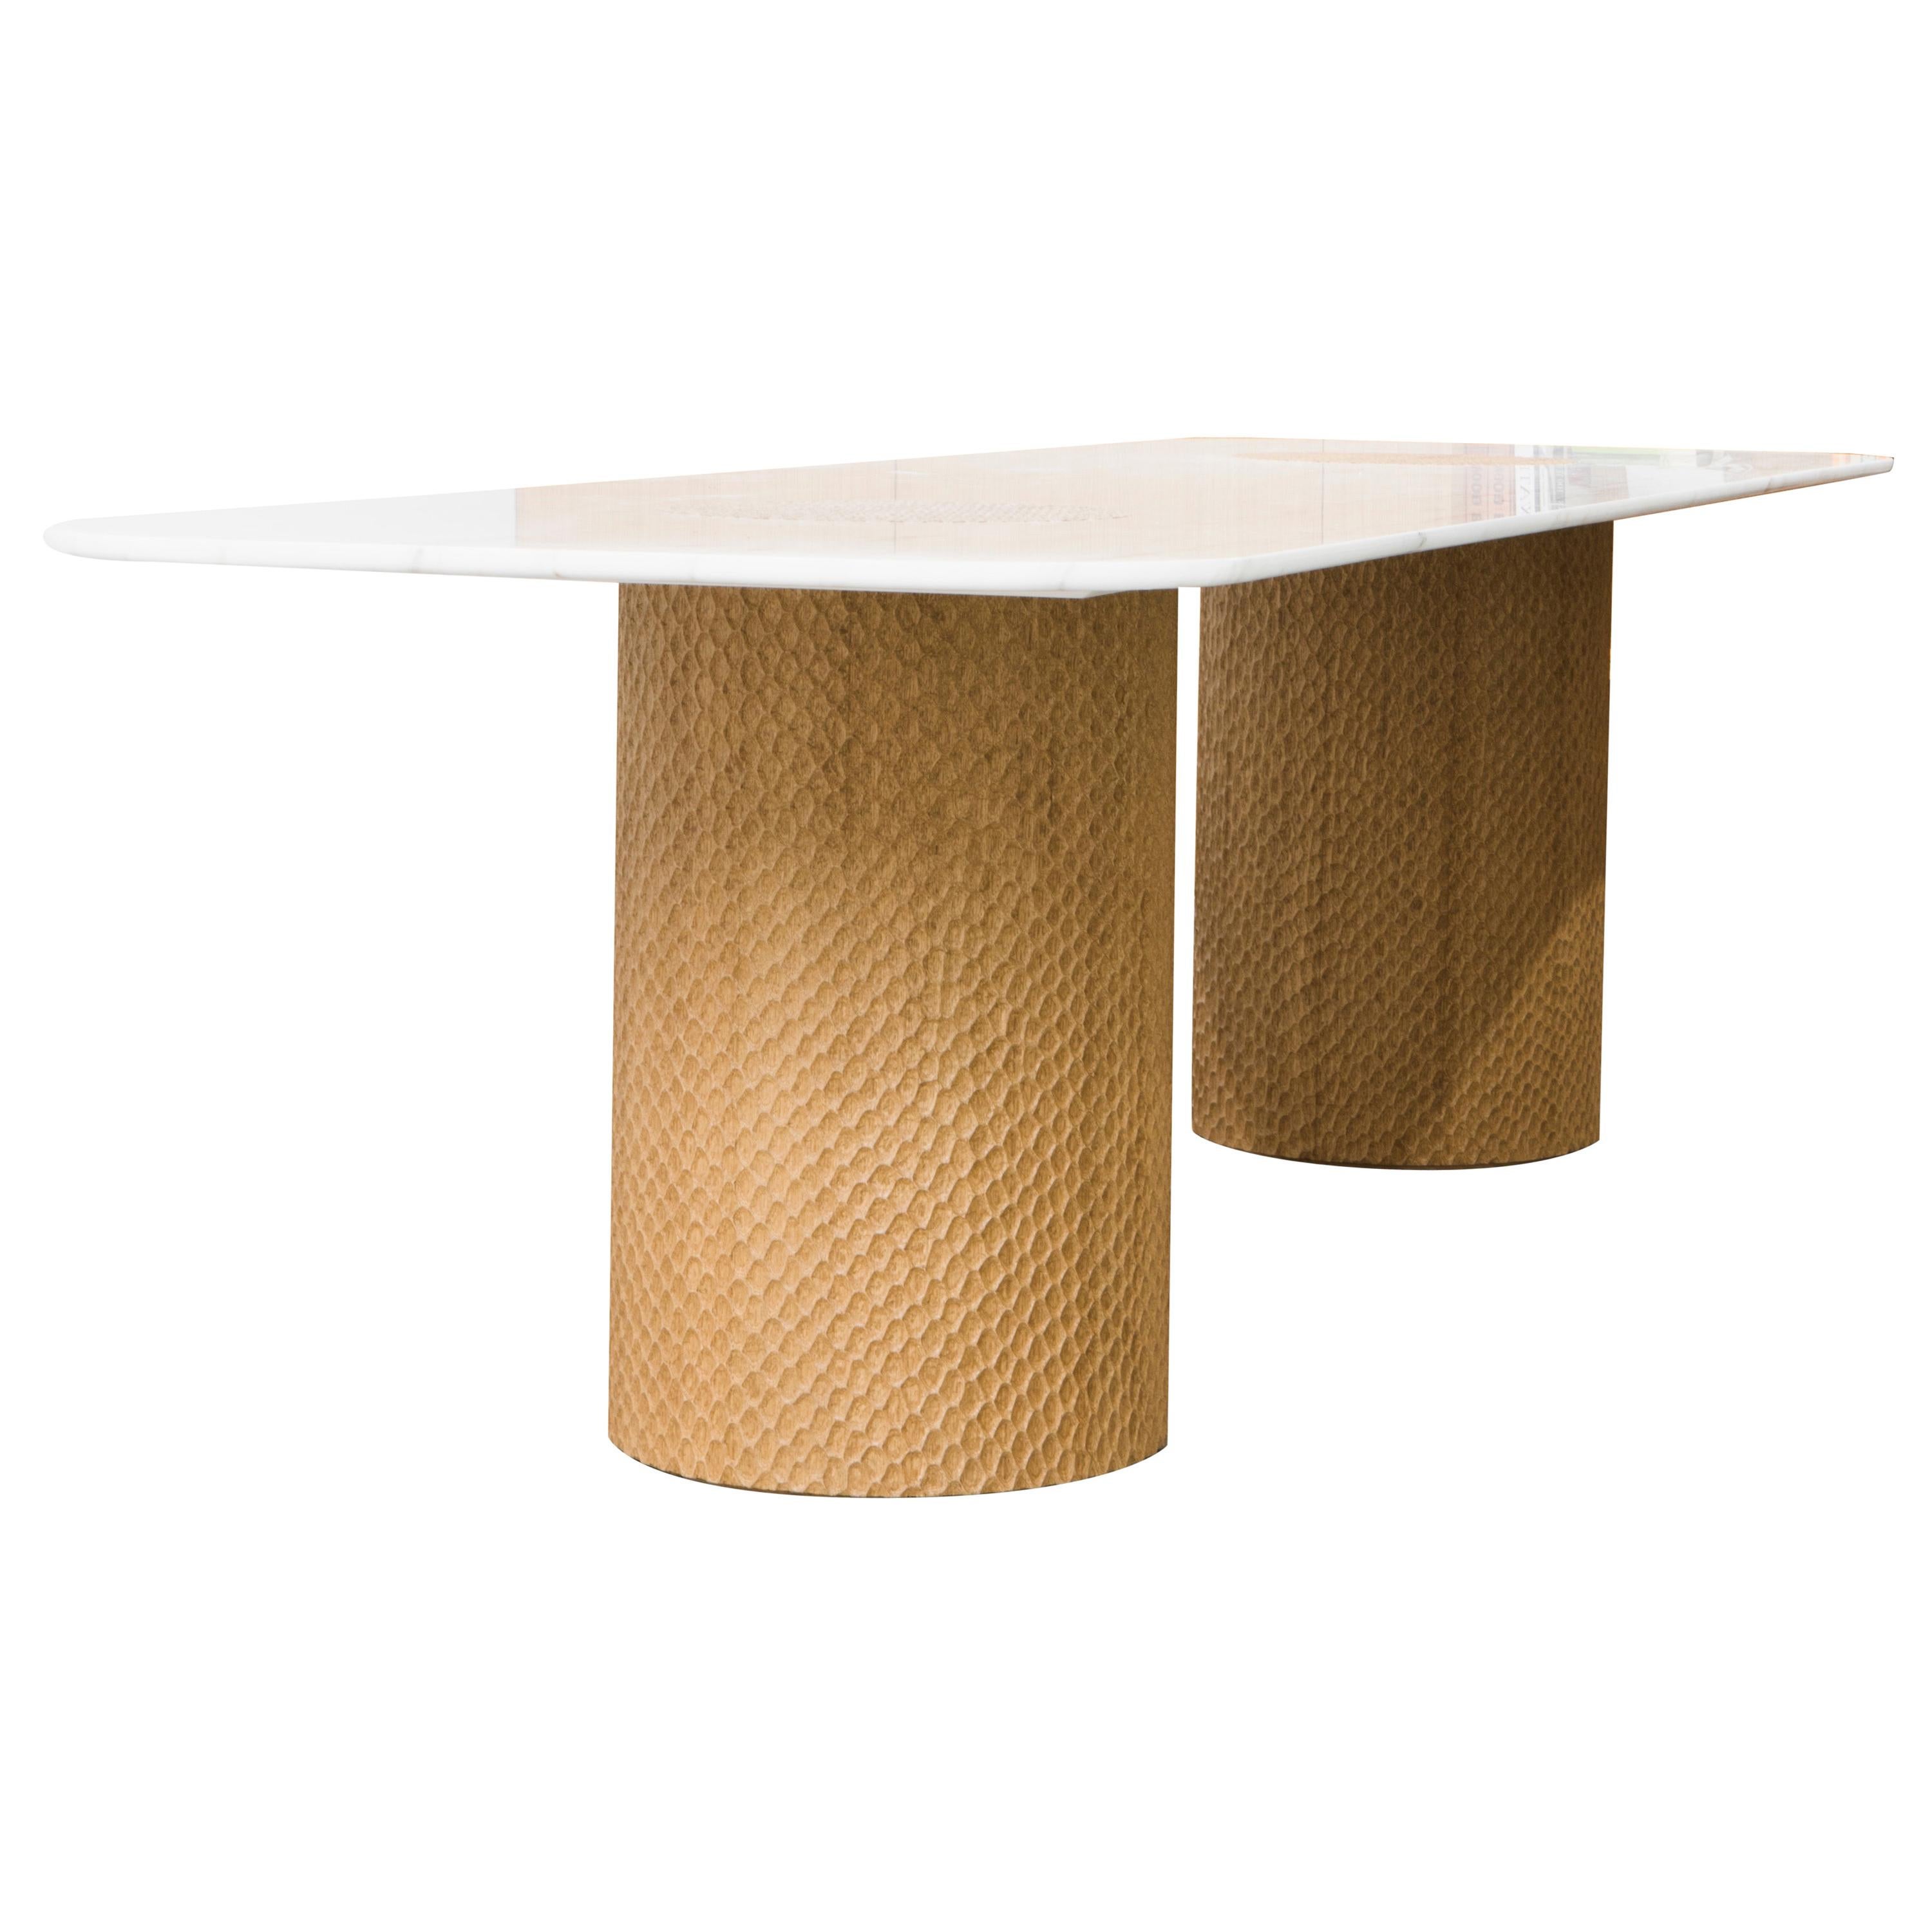 Uroko Dining Table by Thomas Trad